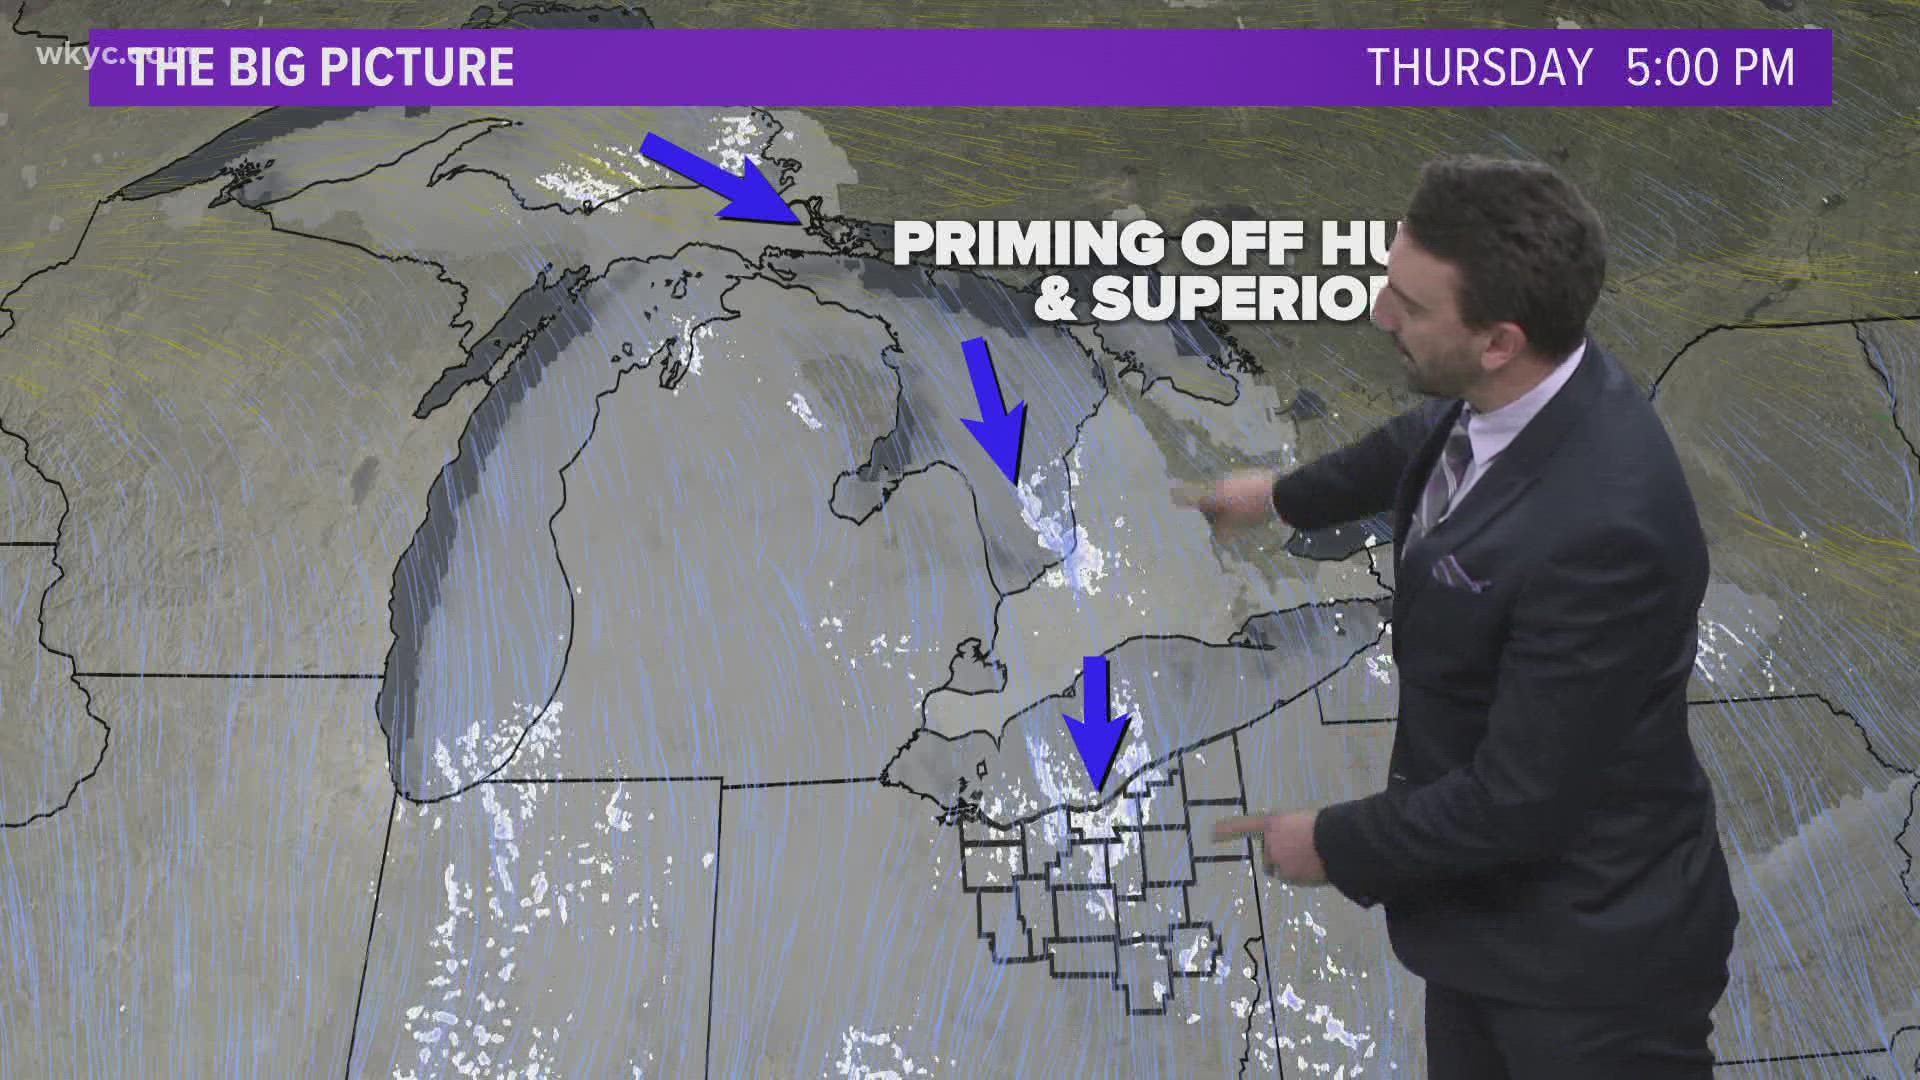 Lake effect is the name of the game. At least that's the case for some of us this evening.